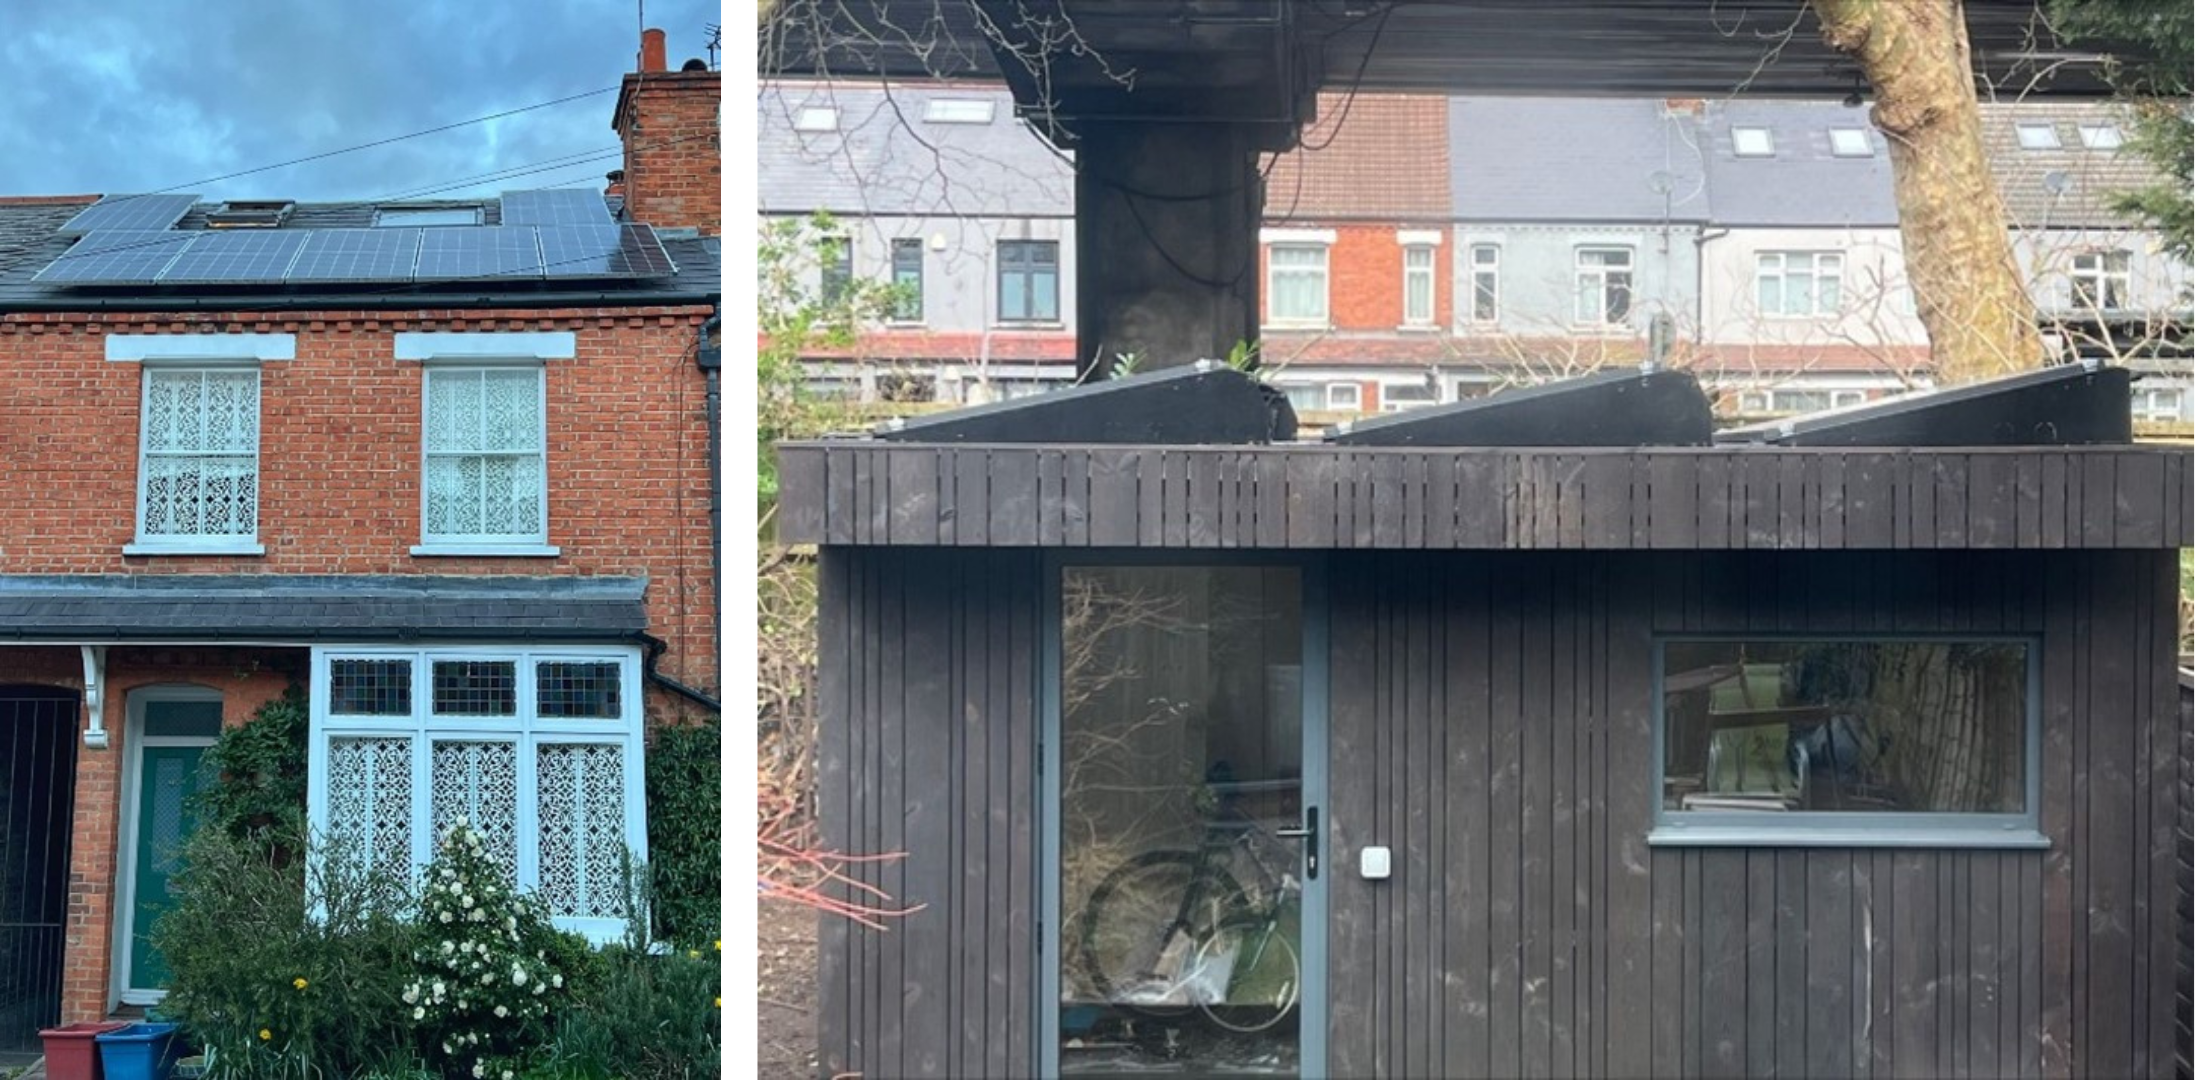 A typical mid-terraced house in West London with solar PV fitted, showing how standard solar panels can be fitted to face the sun and work around constraints. Also solar panels on a shed roof (credit: Olsights).